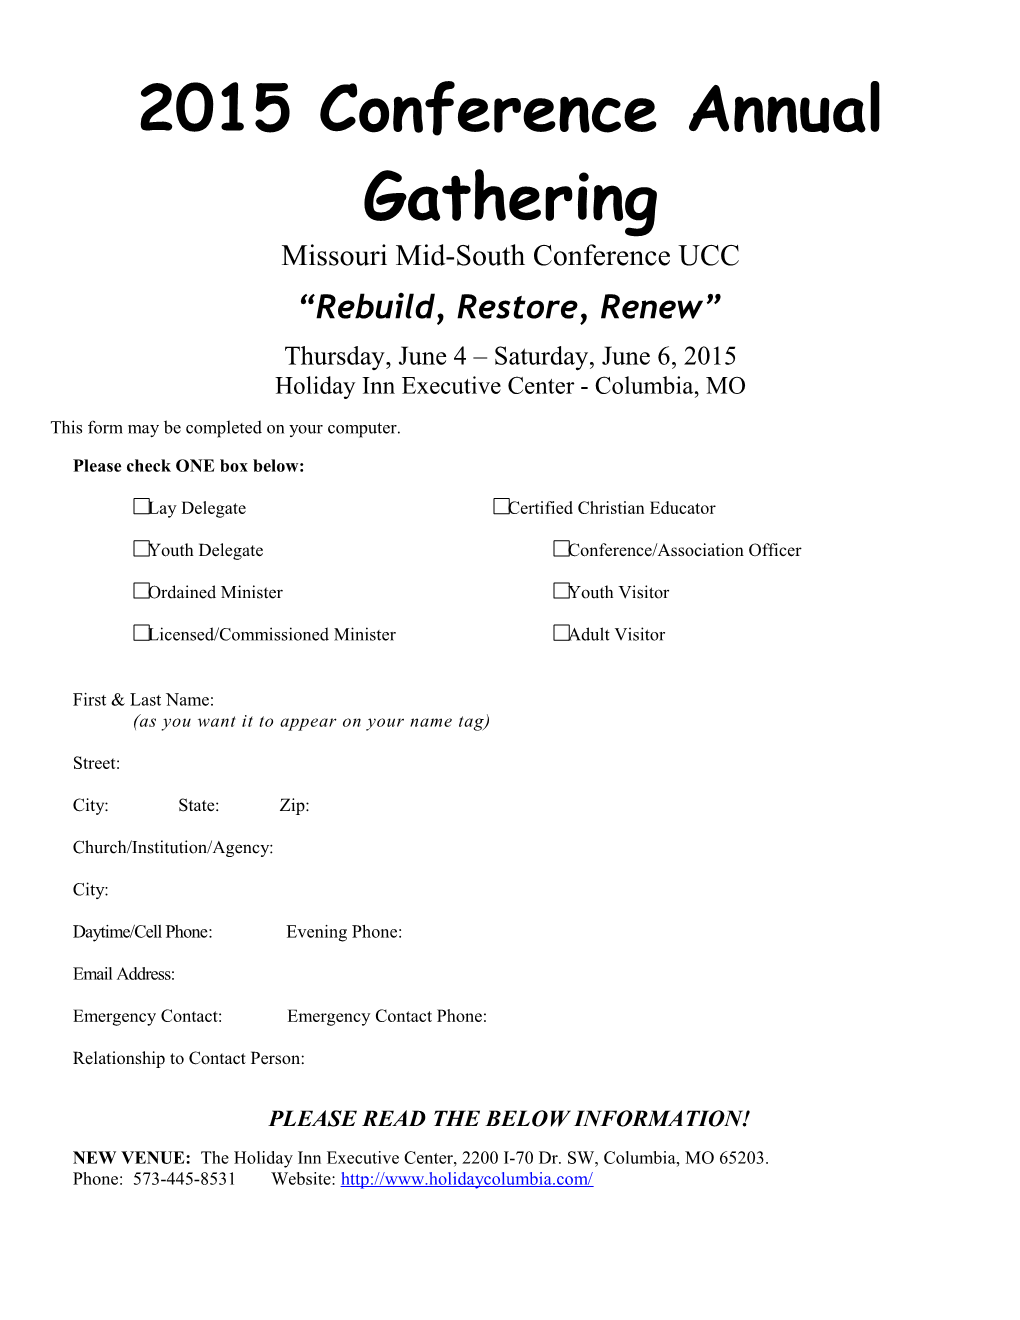 2015 Conference Annual Gathering